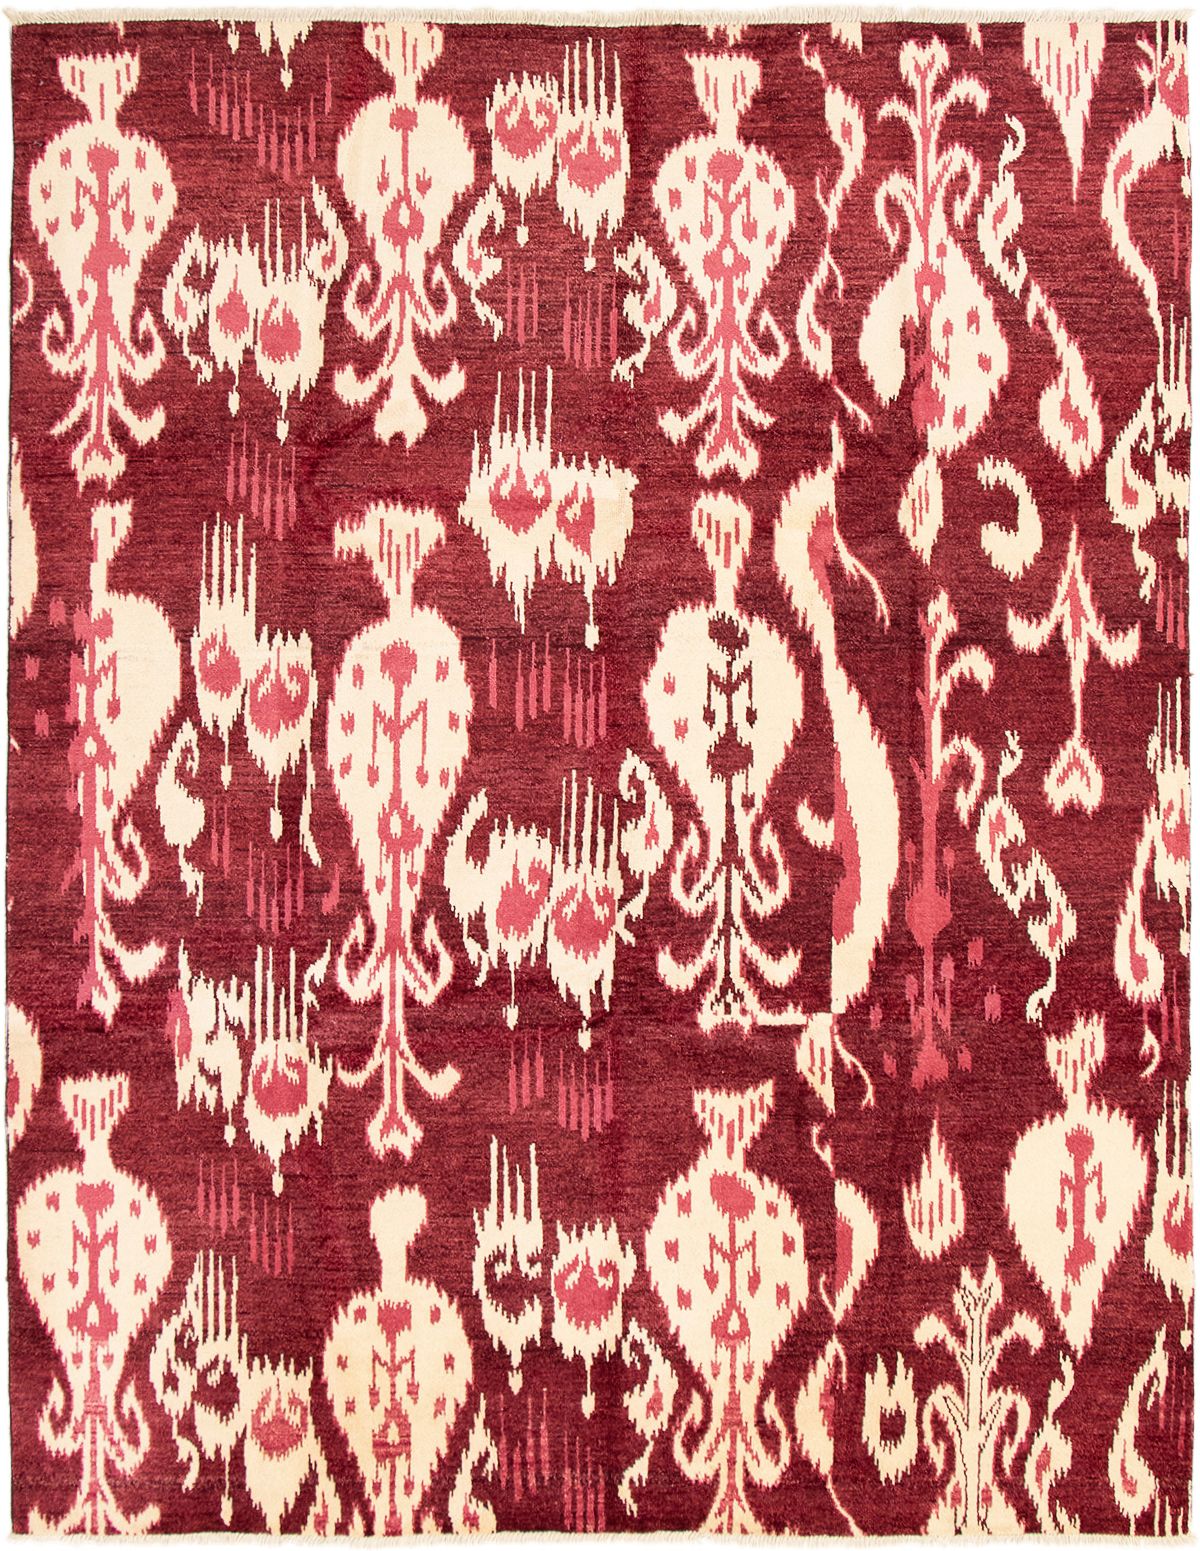 Hand-knotted Shalimar Burgundy Wool Rug 7'10" x 10'2" Size: 7'10" x 10'2"  